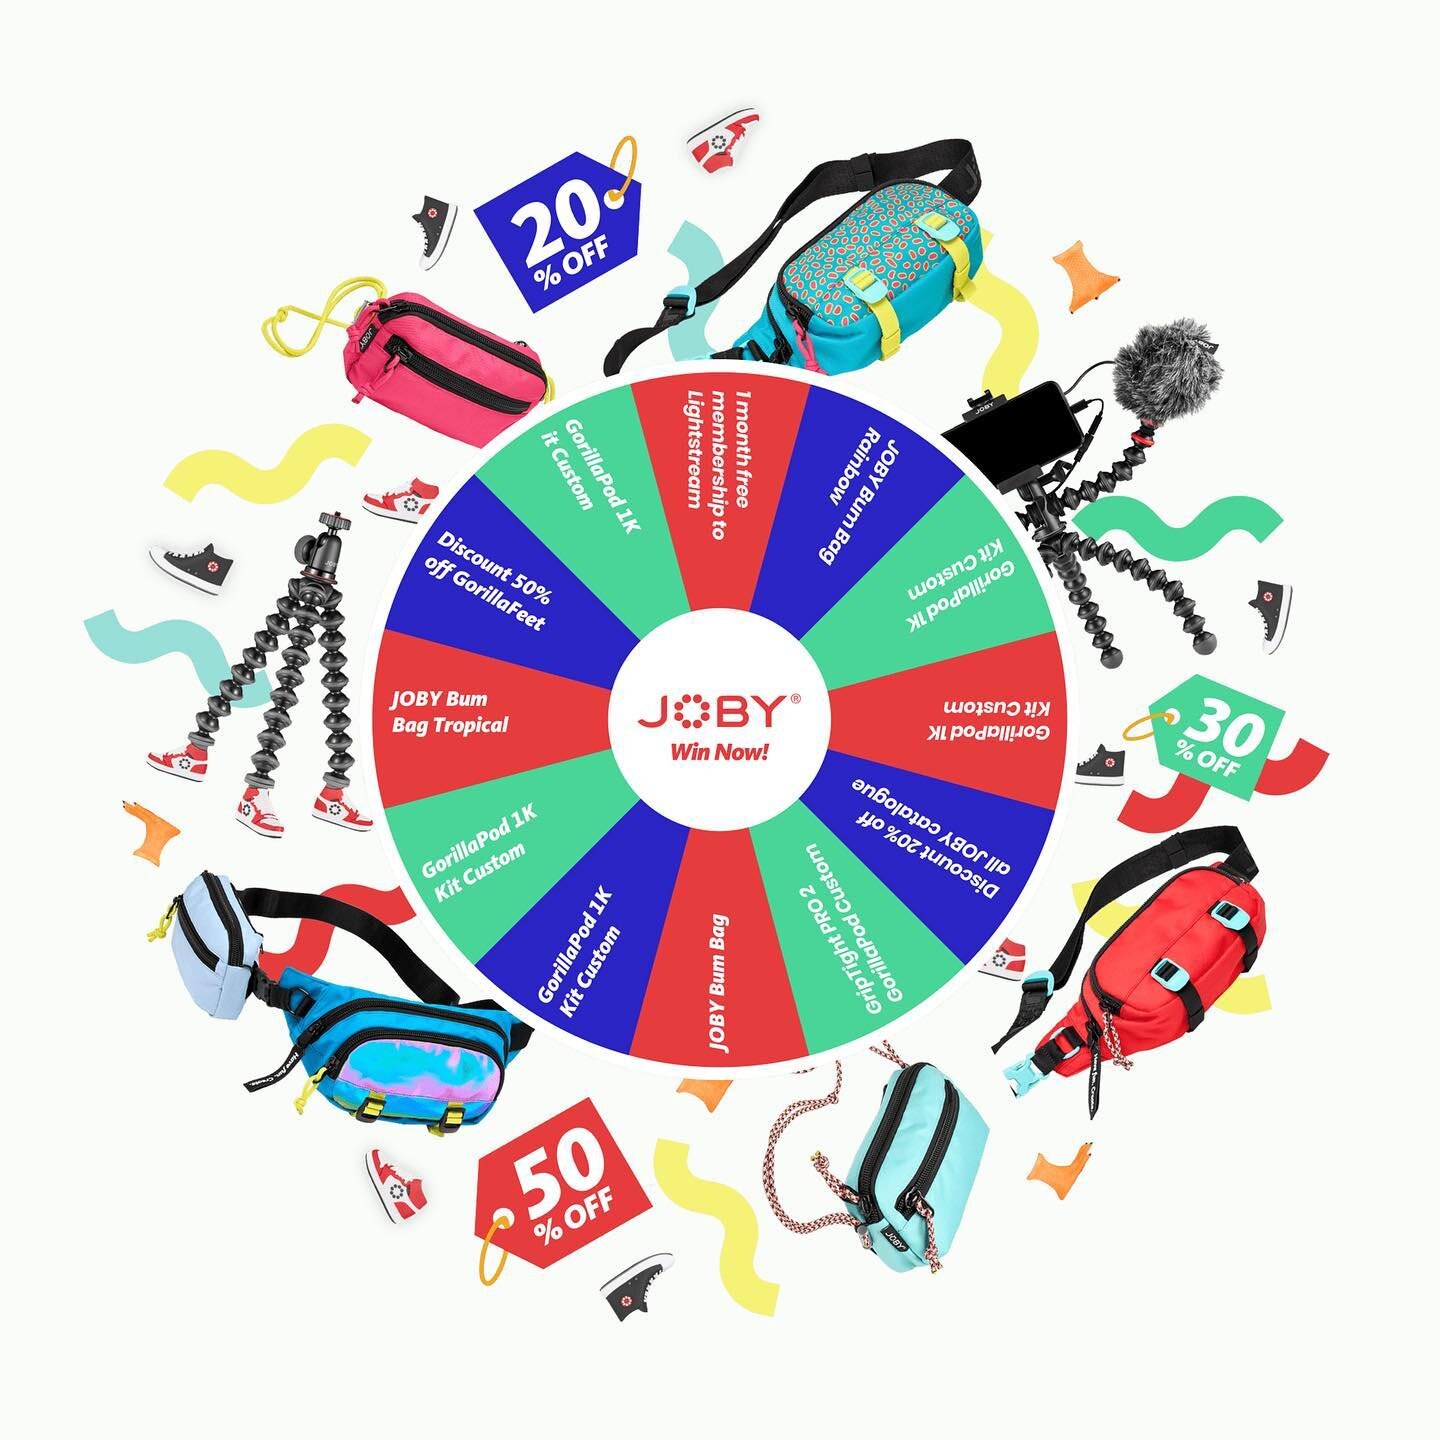 Ahead of Black Friday, JOBY are giving customers a chance to spin &amp; win up to &pound;180 of products, including the brand accessory line for its famous tripods, and other colourful creator gear!

More info online 👉 bit.ly/3wOQVzc

#joby #gorilla